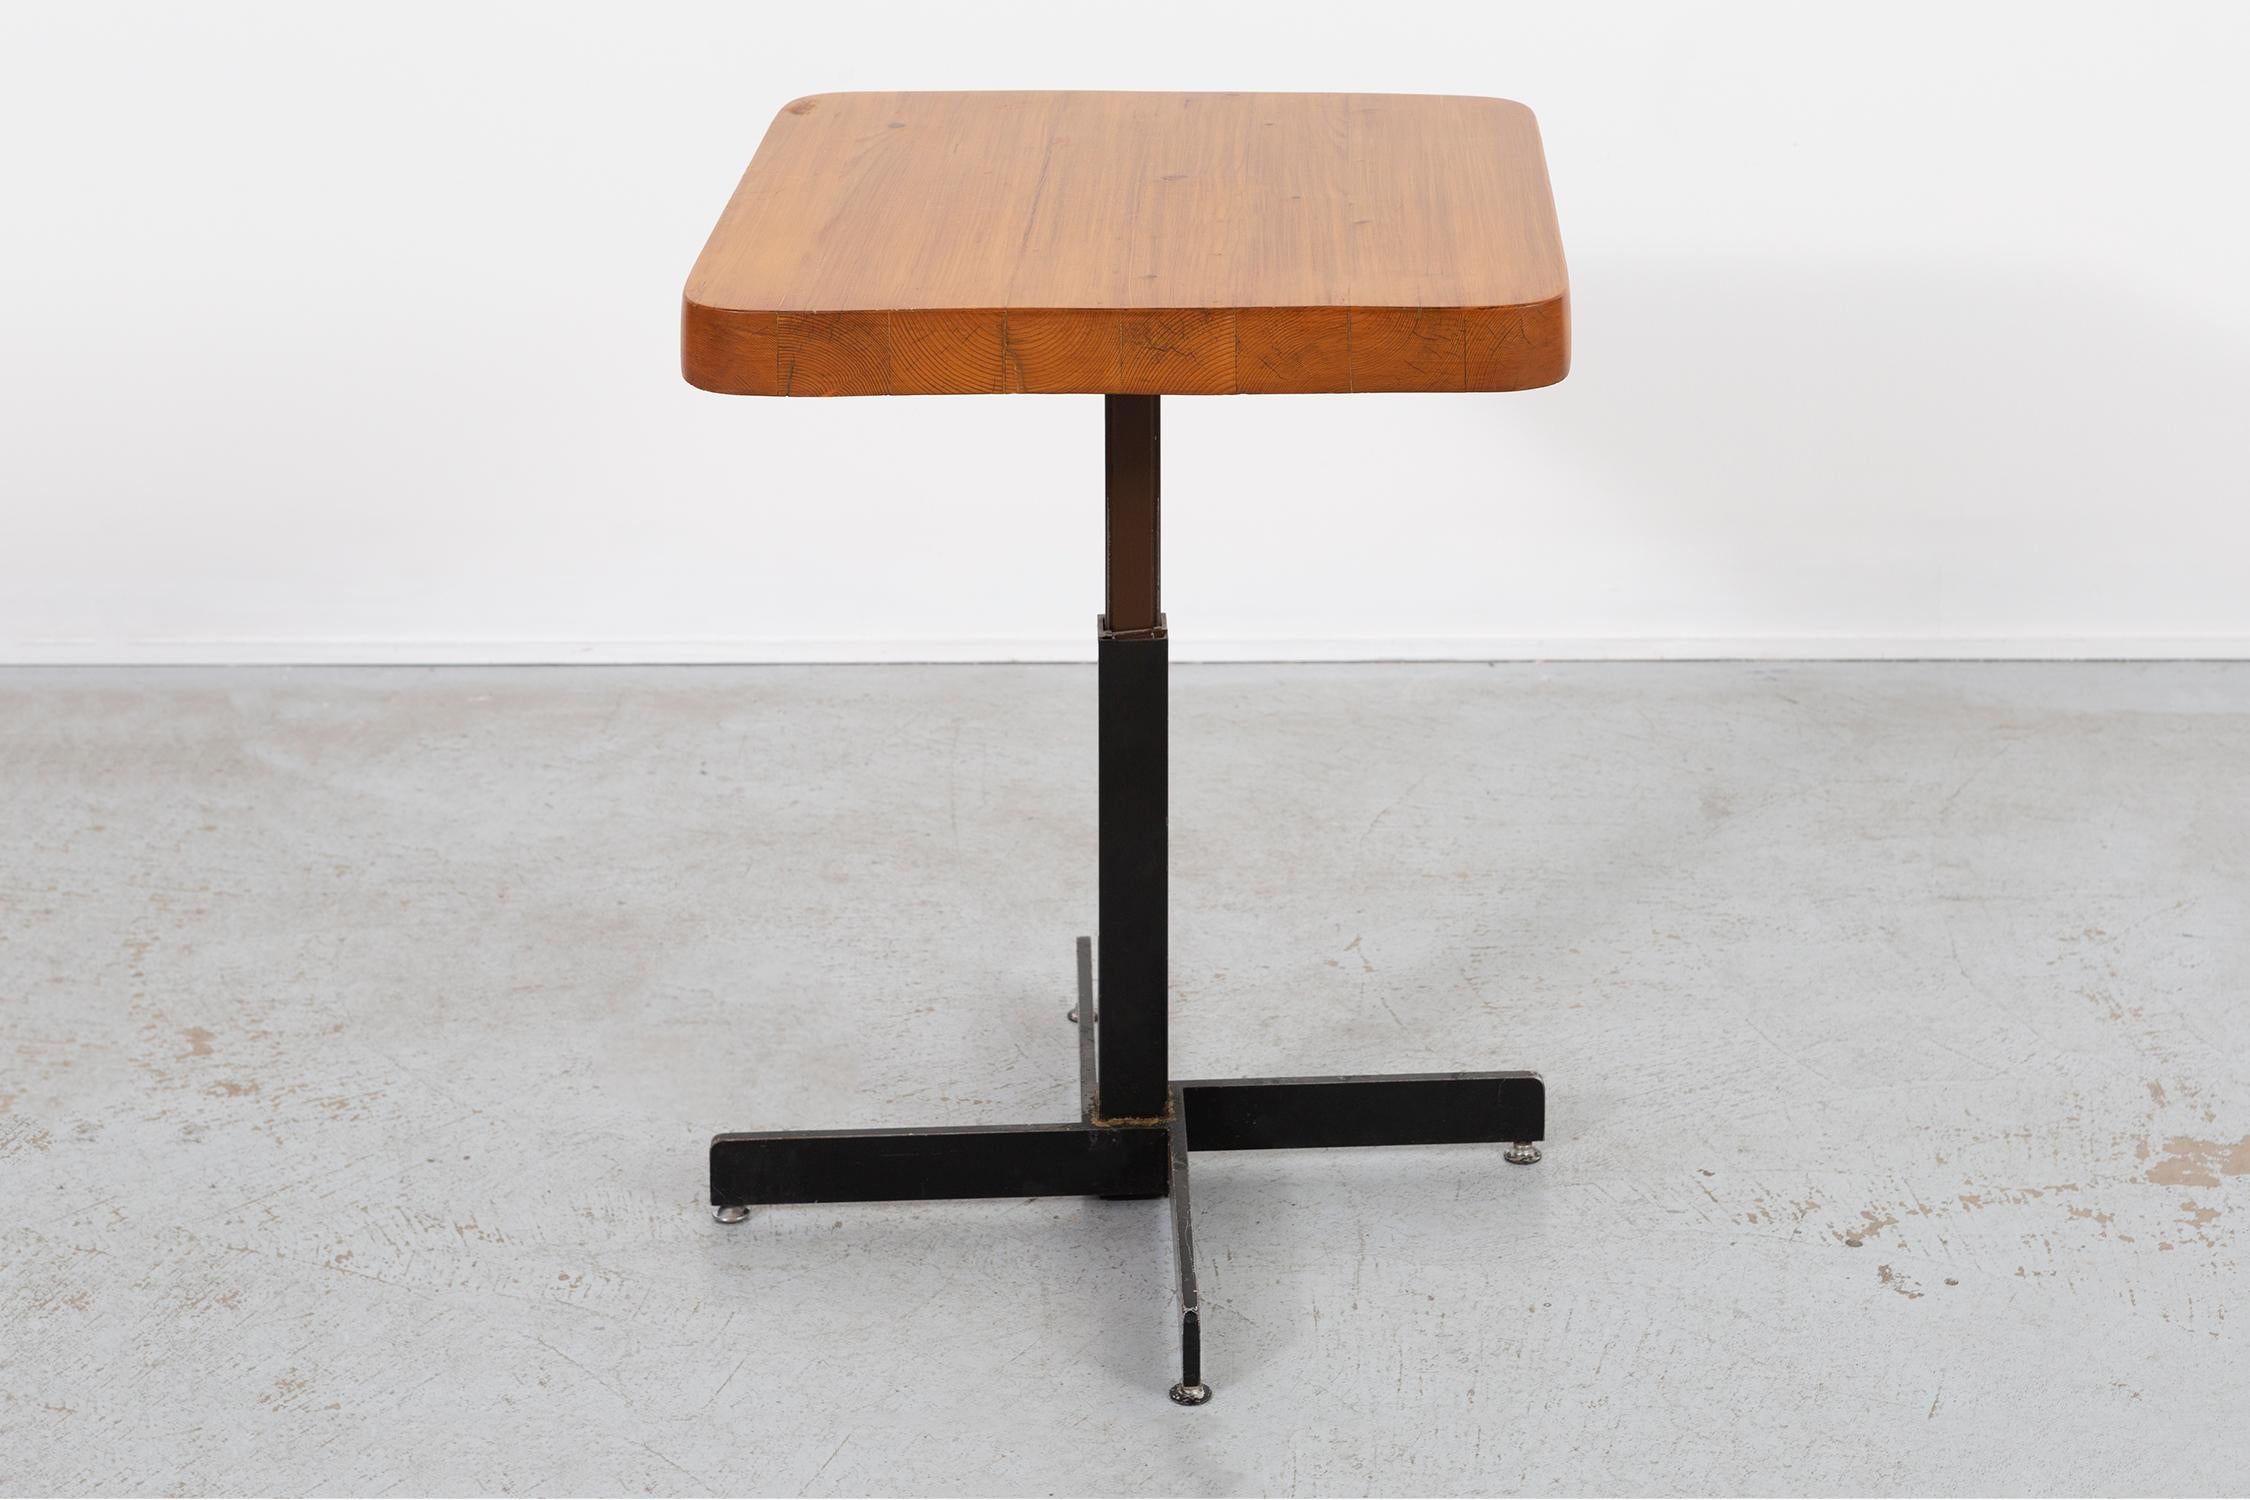 Square table

Designed by Charlotte Perriand for Les Arcs 2000

France, circa 1968

Enameled steel and pine

Measures: 29 ?” H x 23 ½” W x 22 ¾” D

This particular form was utilized in many Les Arcs residences 

Pictured with the pentagonal table